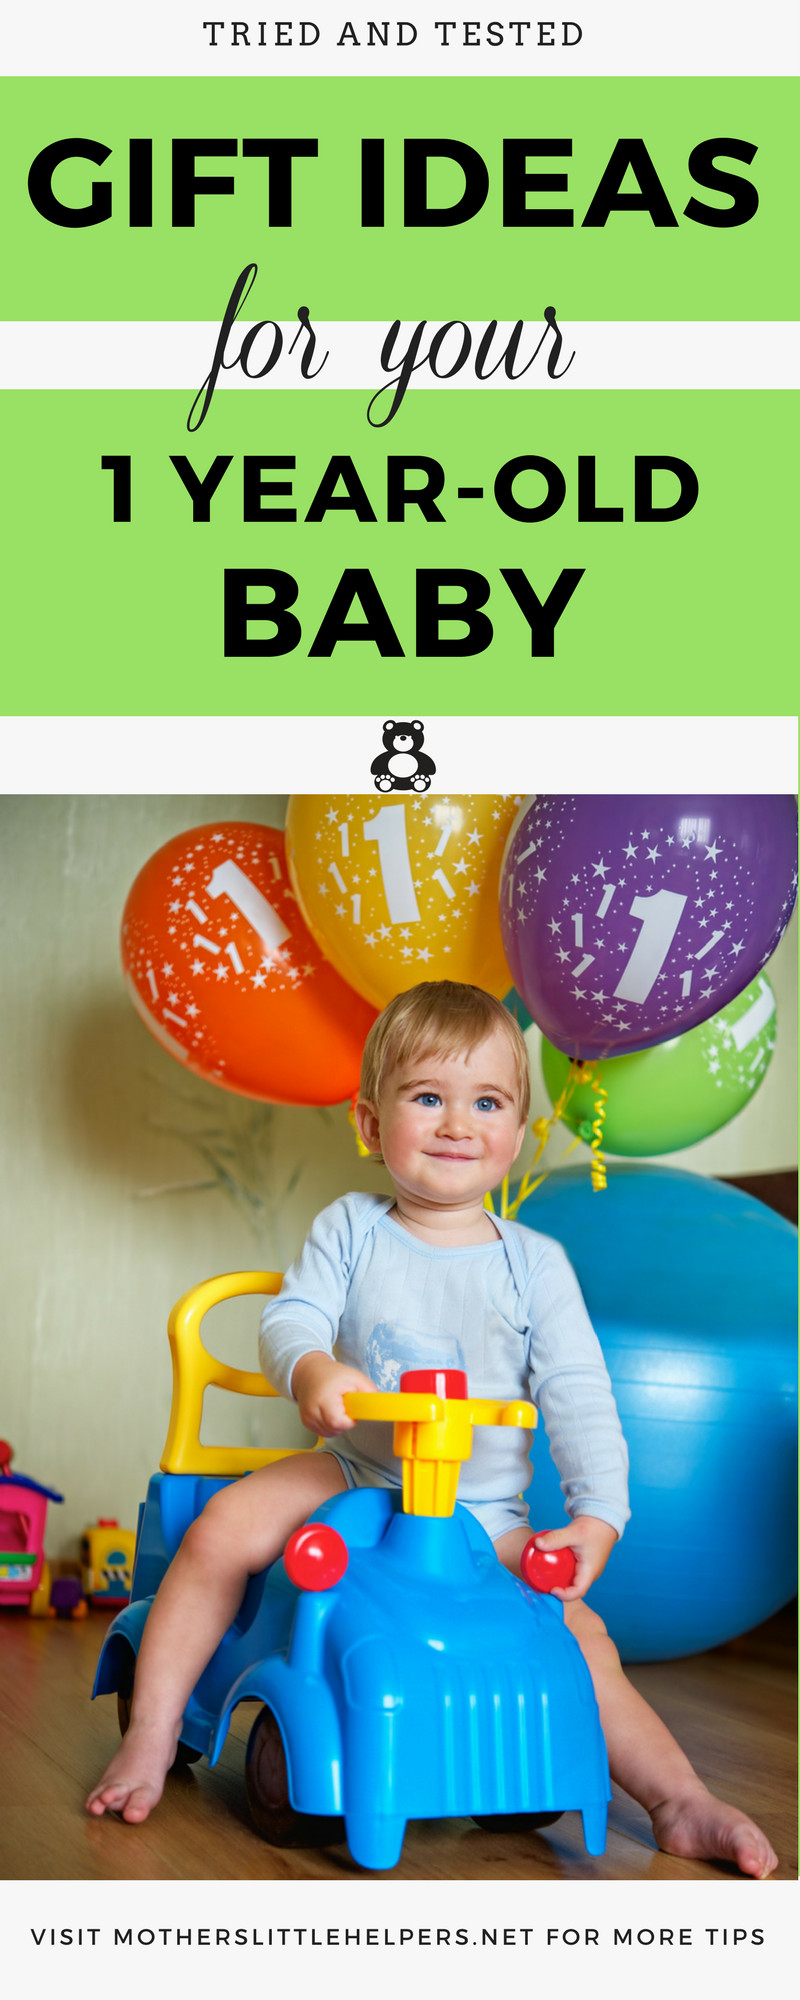 1 Year Baby Gift Ideas
 Best Gift for e Year Old Baby Gift Guide 2020